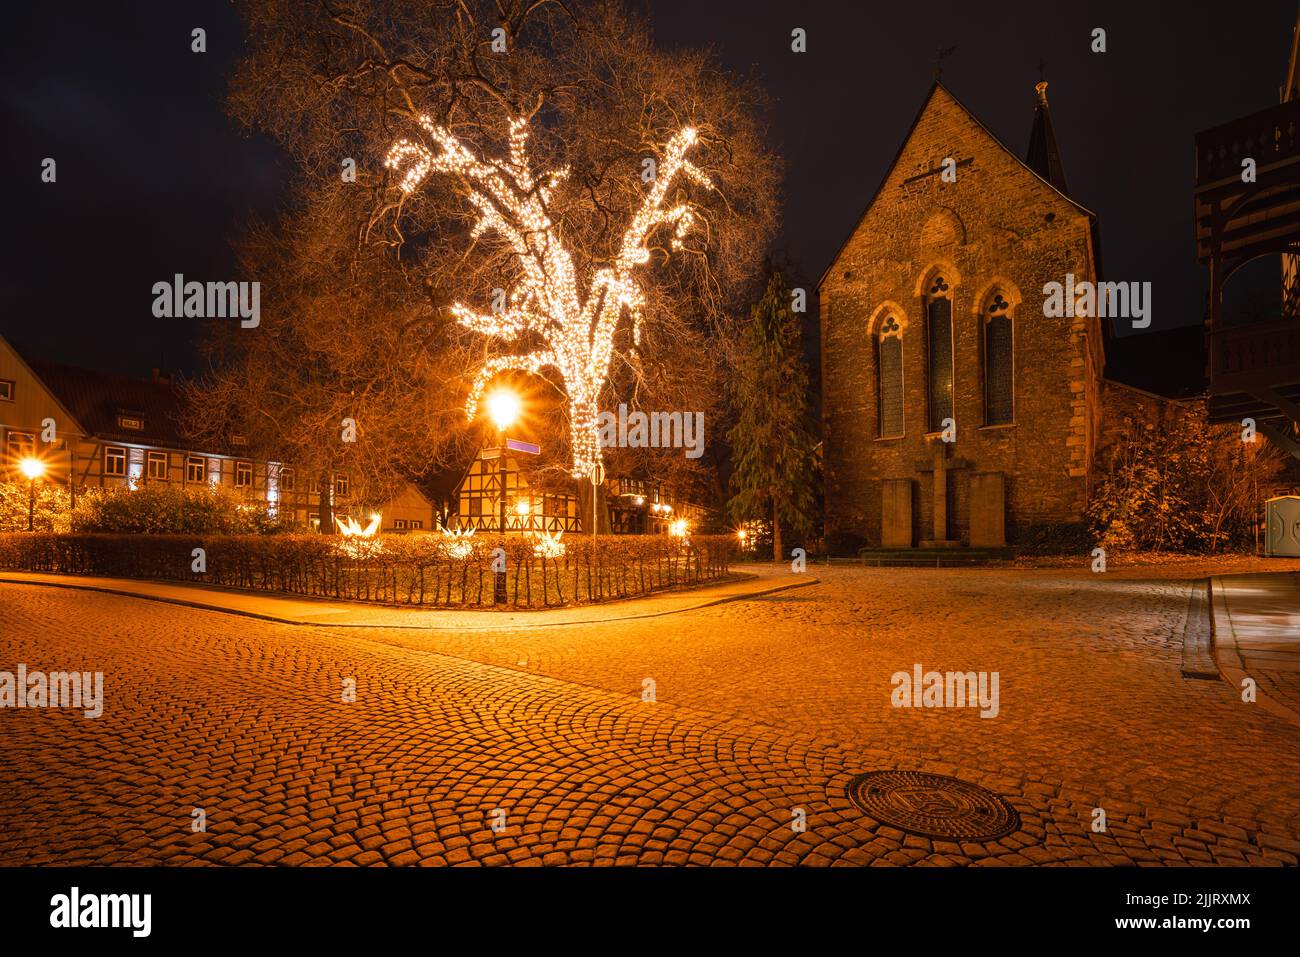 Large tree illuminated with Christmas lights in front of a church in Wernigerode Stock Photo